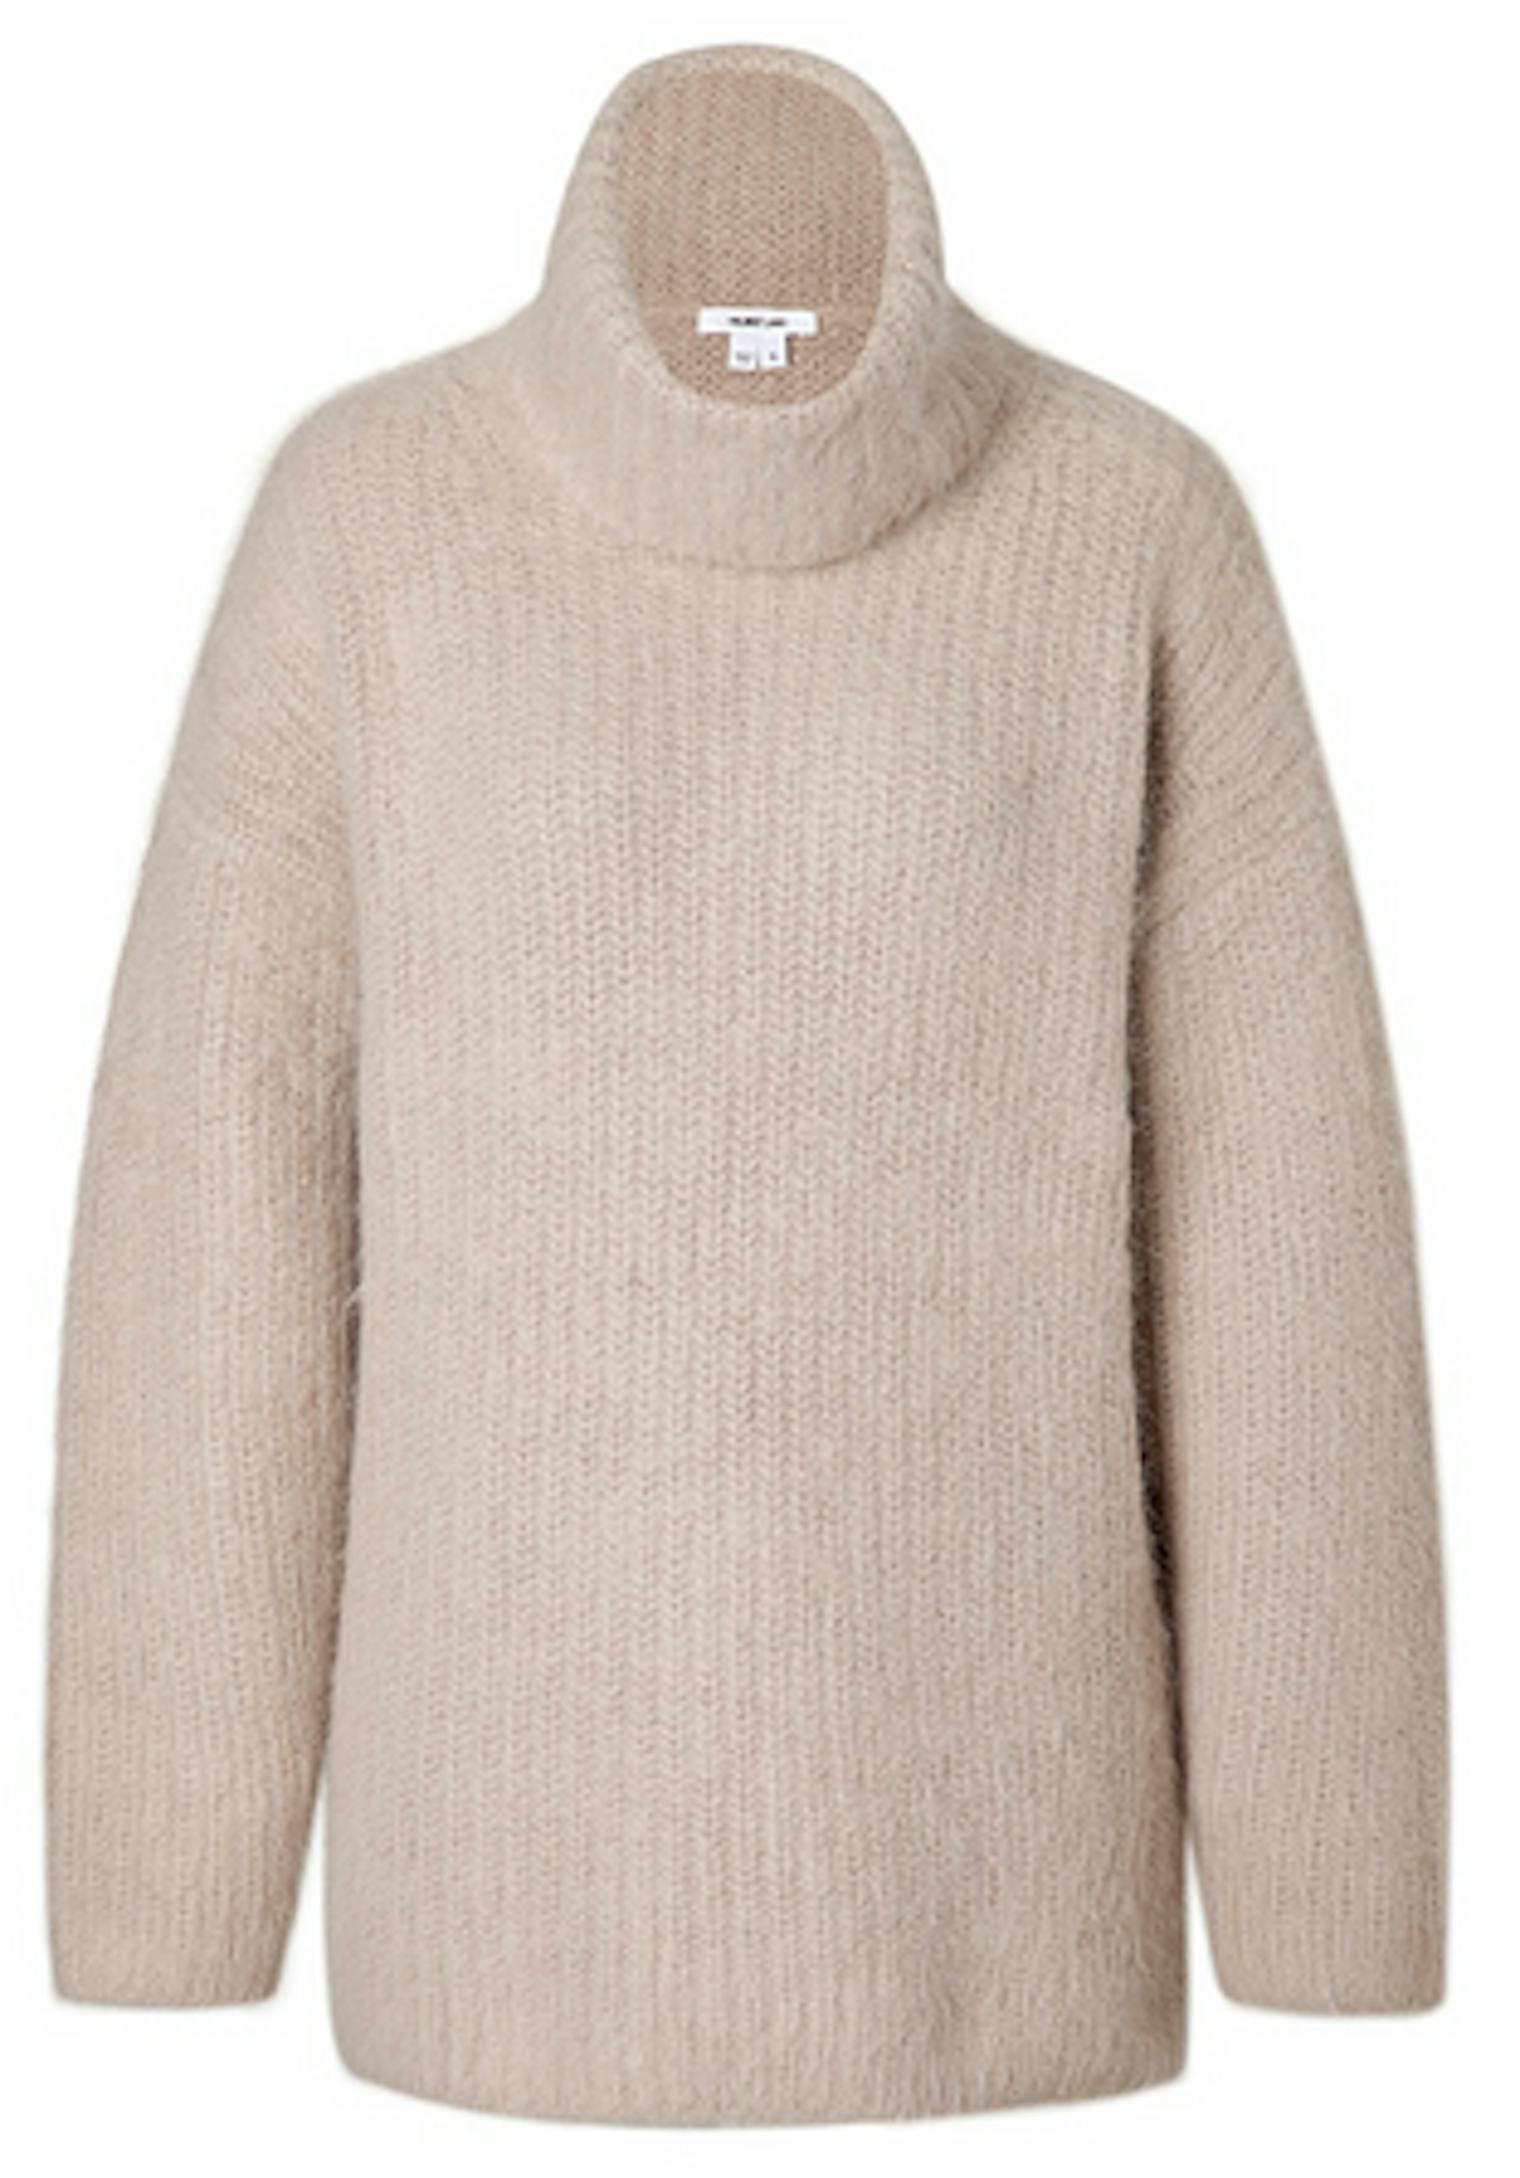 Find The Fall Sweater Trend That's Perfect For You, Because It's Time ...